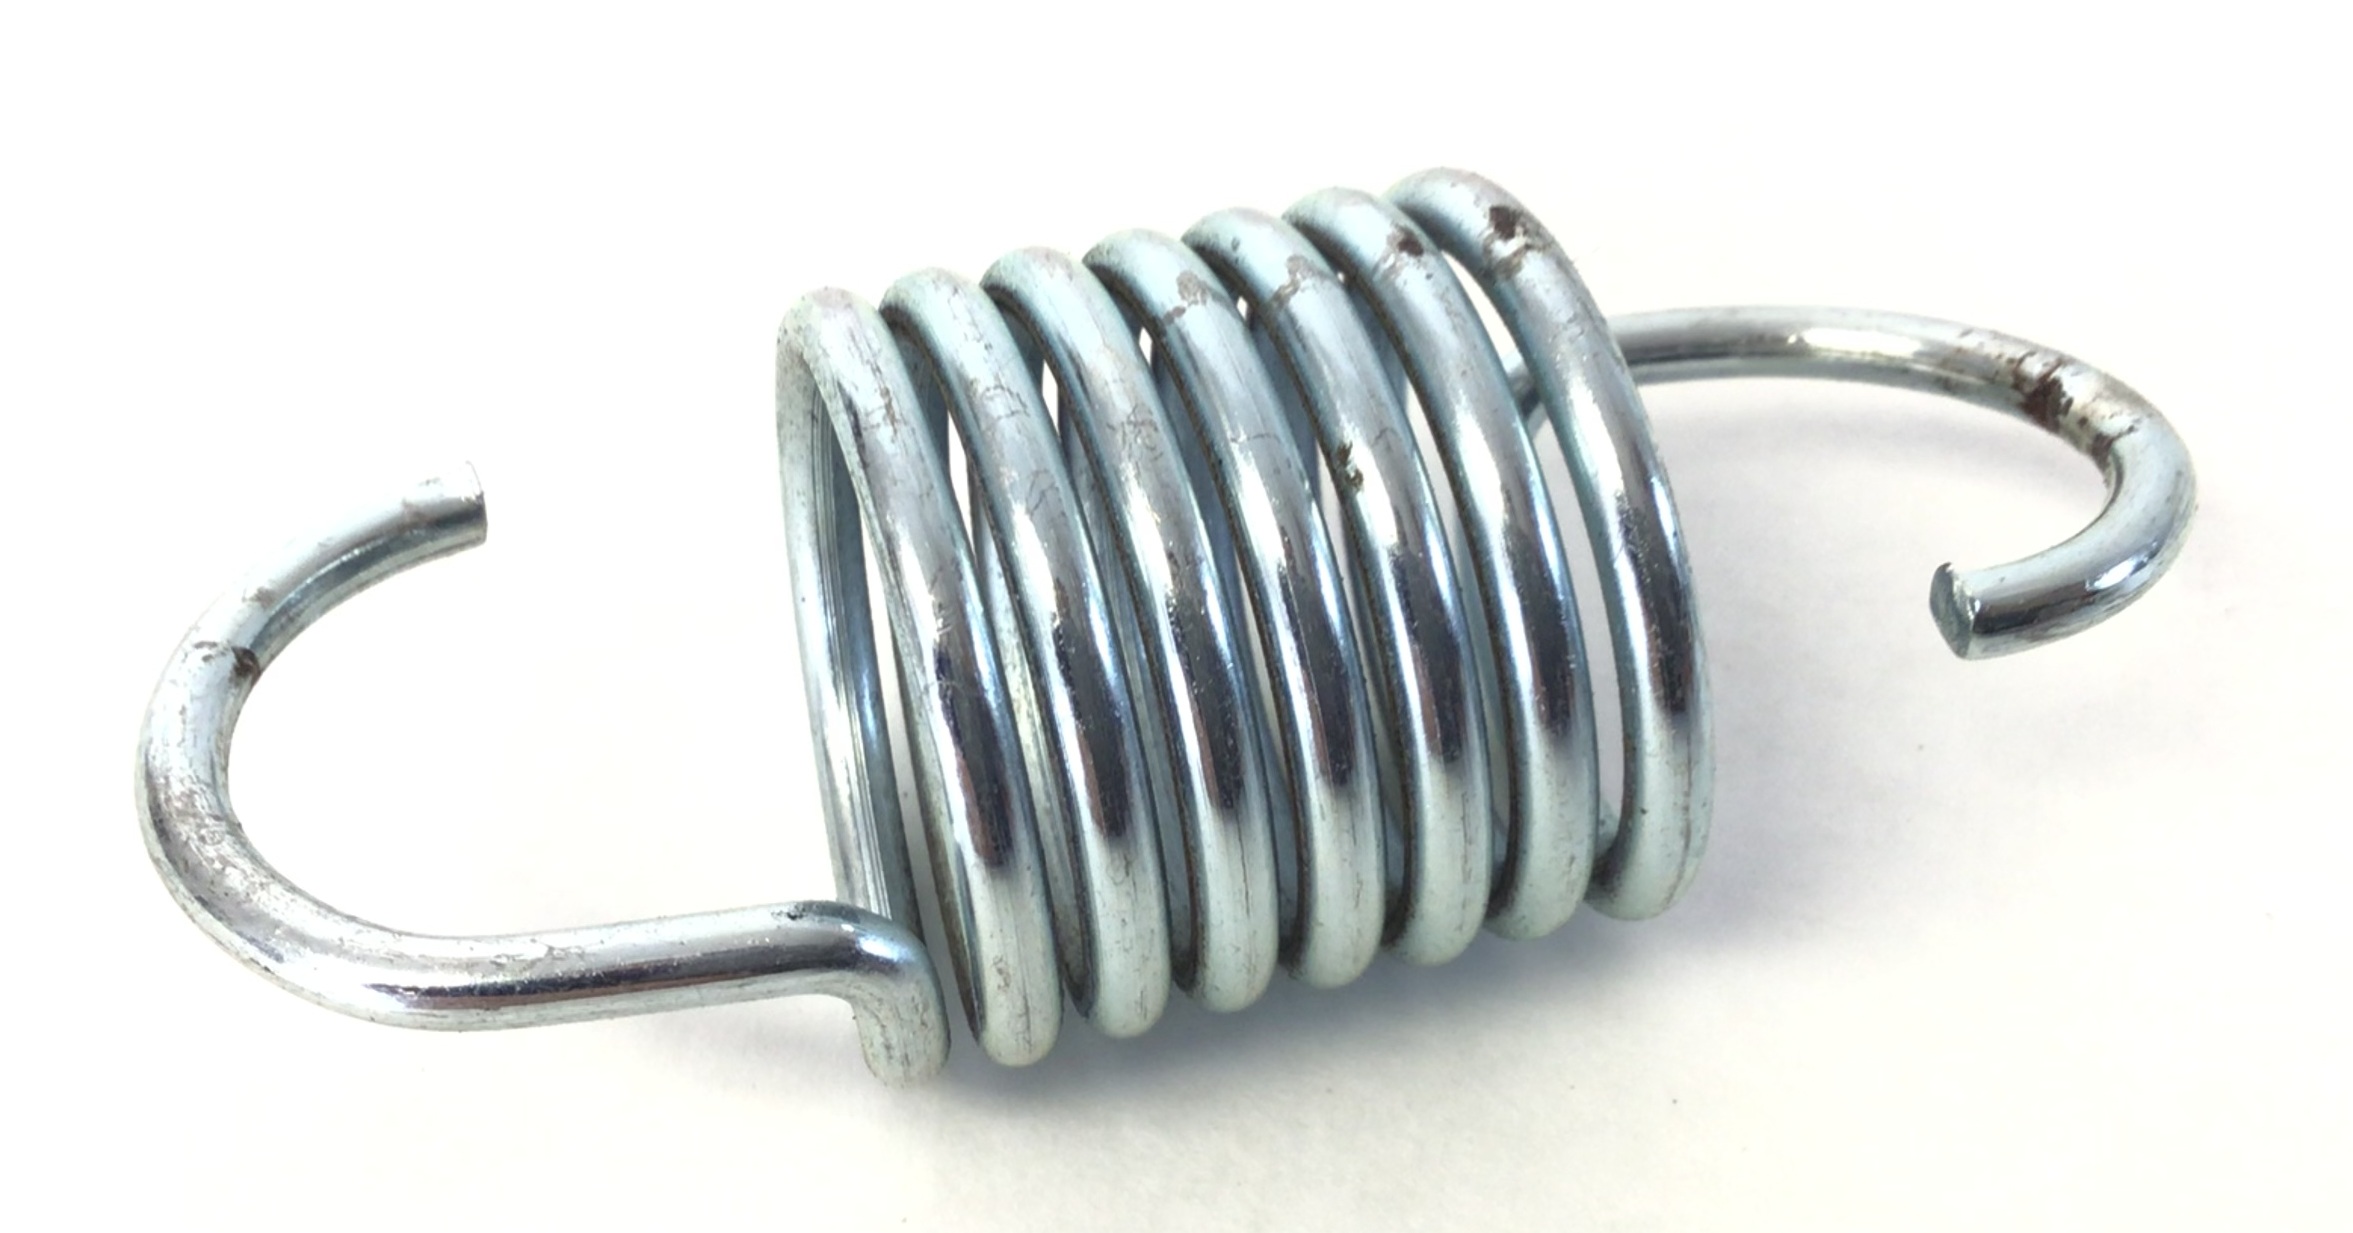 Pulley Tension Spring (Used)